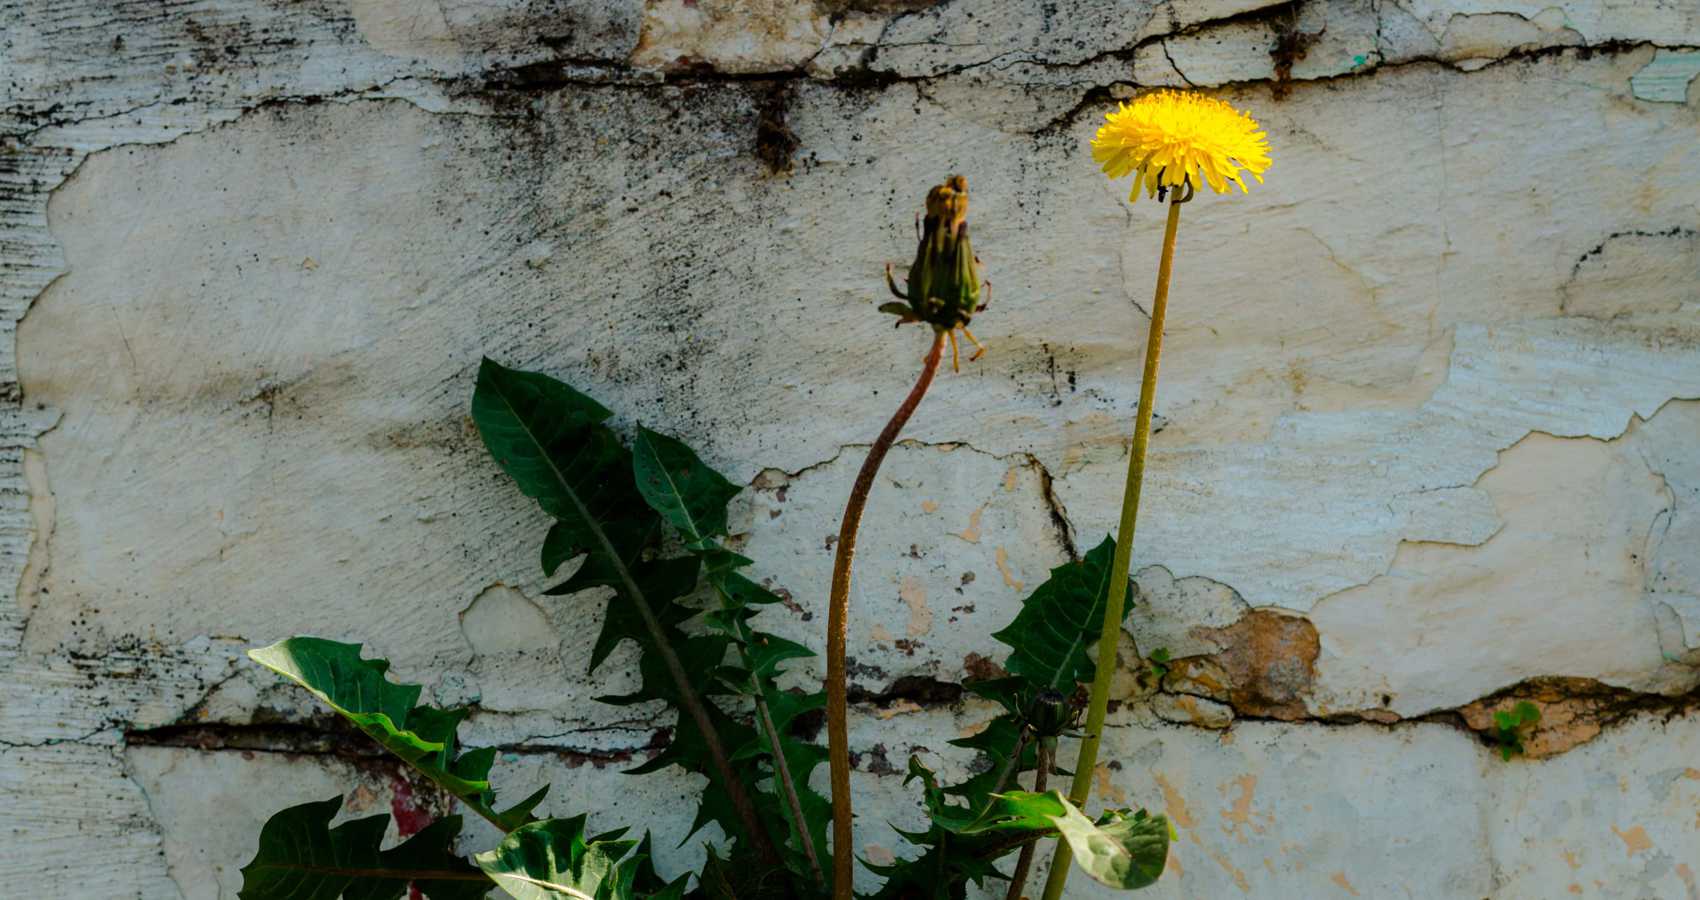 It's Just a Dandelion, poem by Eileen C. at Spillwords.com